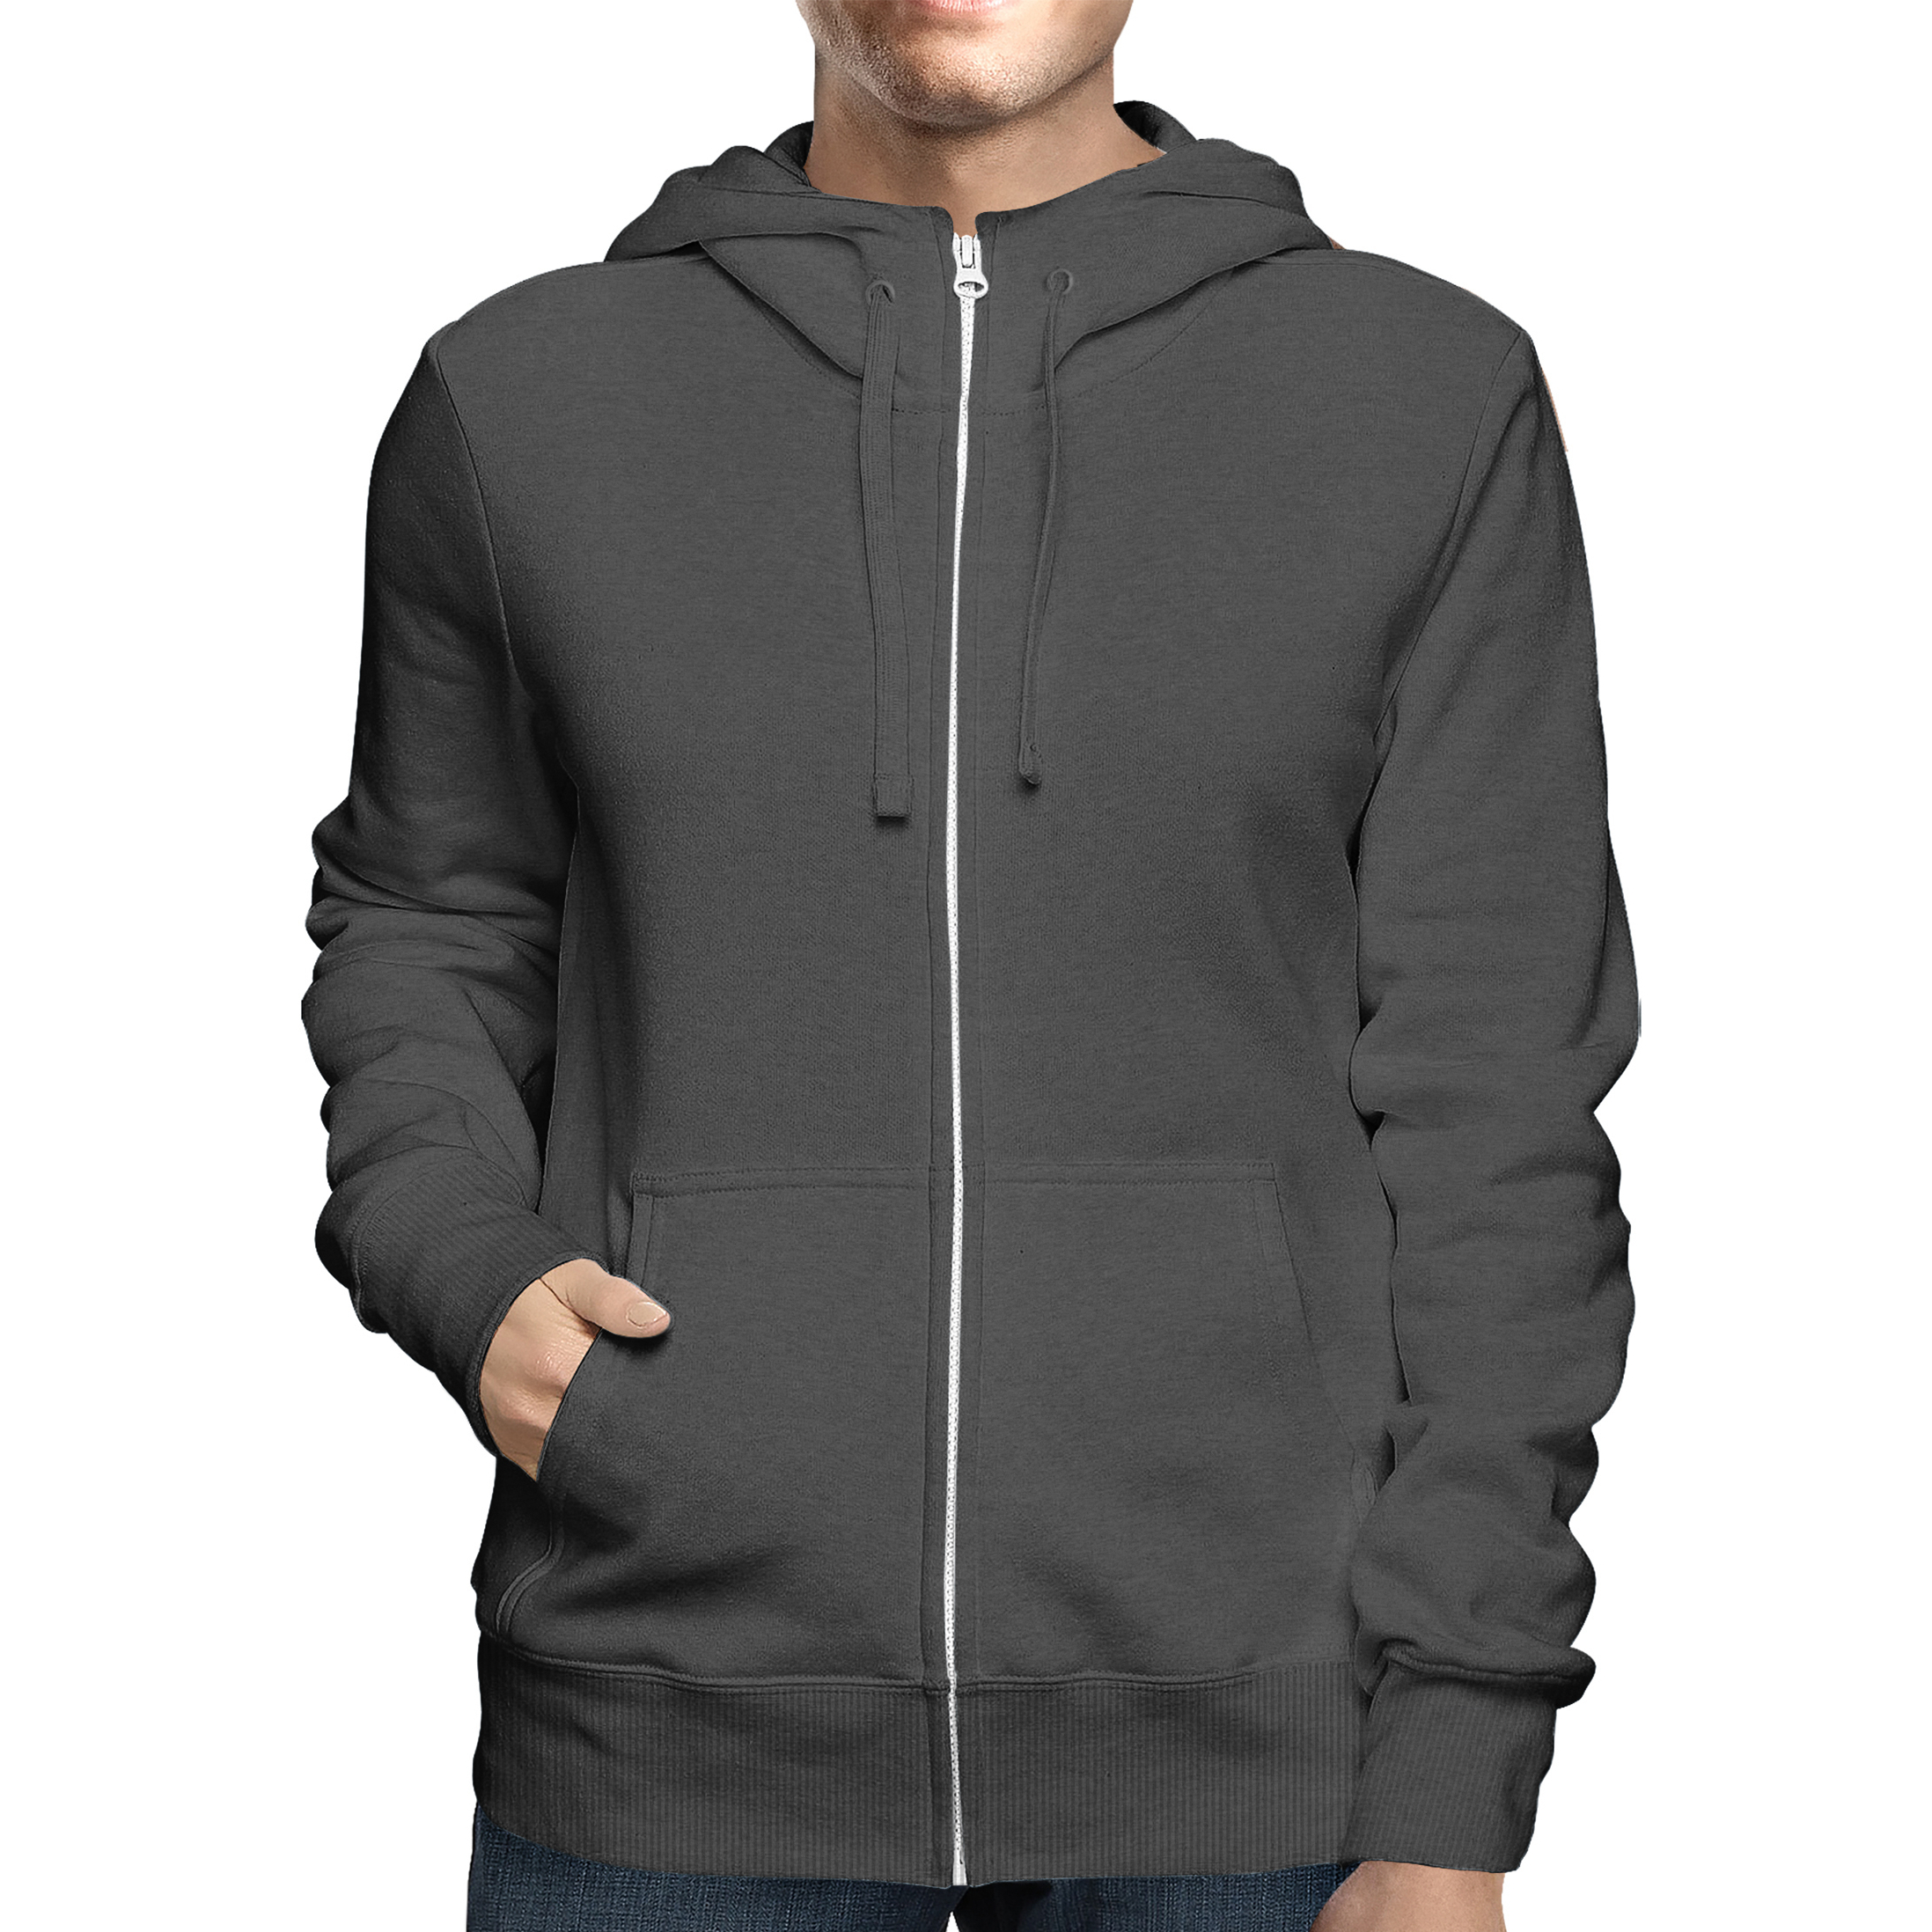 2-Pack: Men's Full Zip Up Fleece-Lined Hoodie Sweatshirt (Big & Tall Size Available) - Charcoal, Large